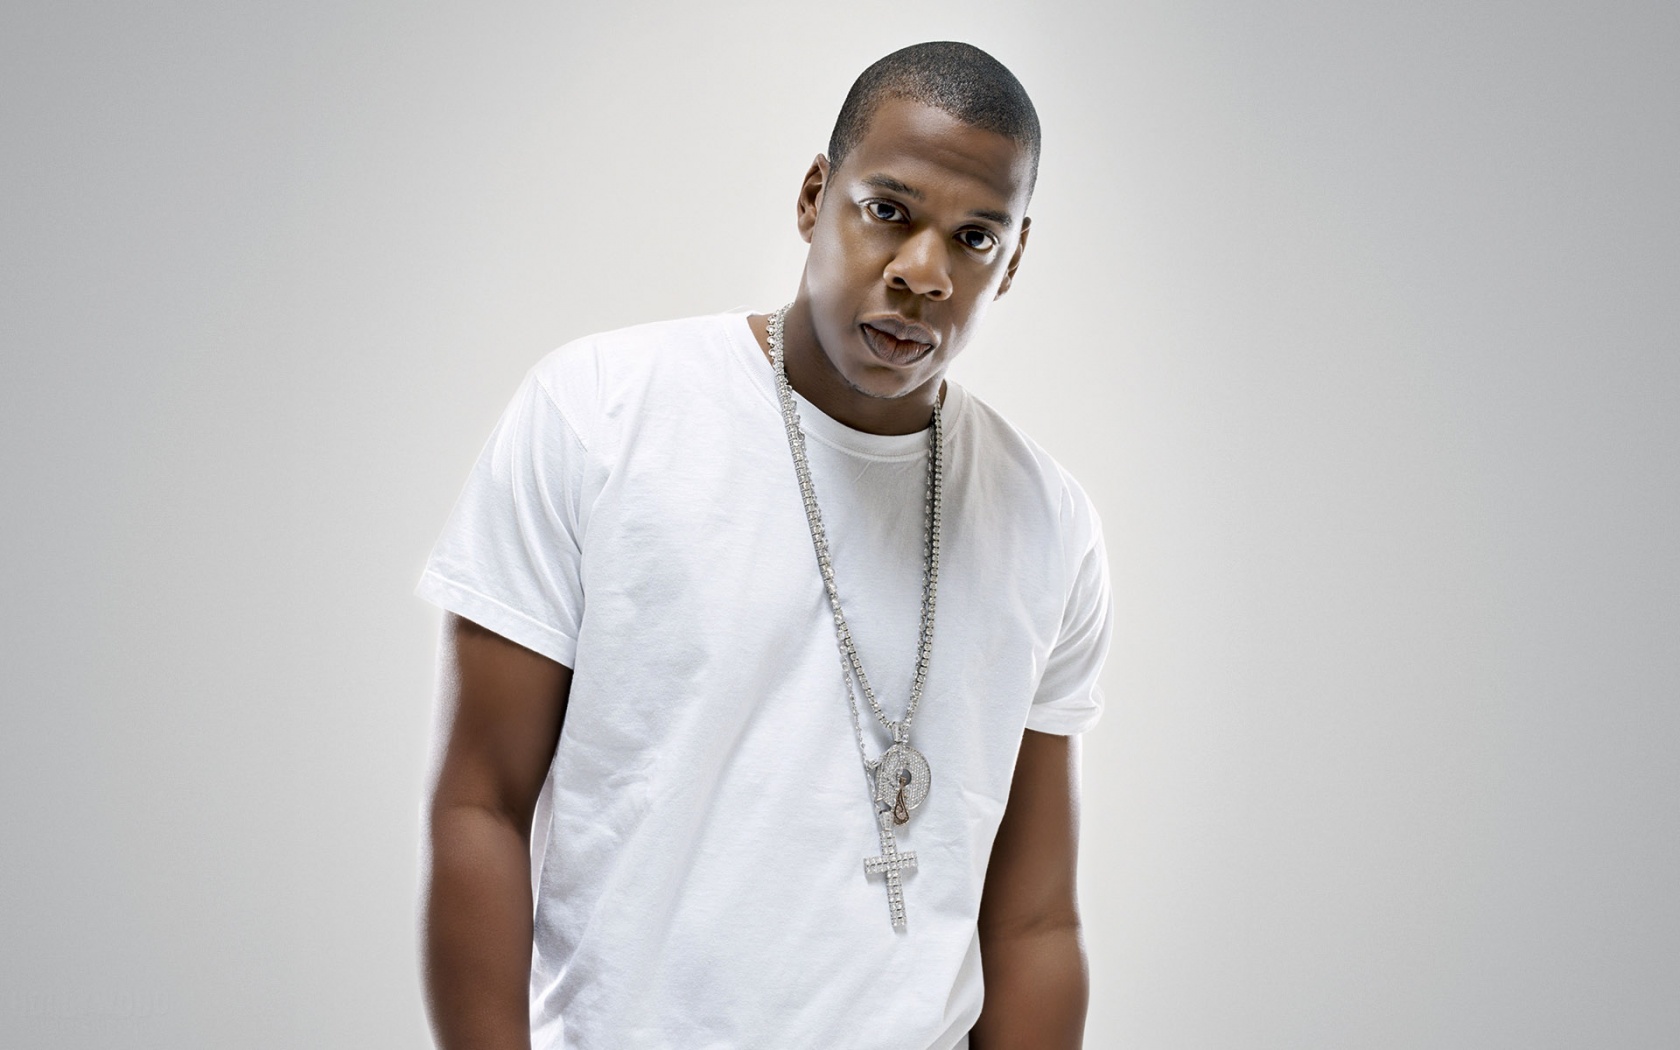 Jay-Z's Entertainment Company Makes Music Deal With Universal